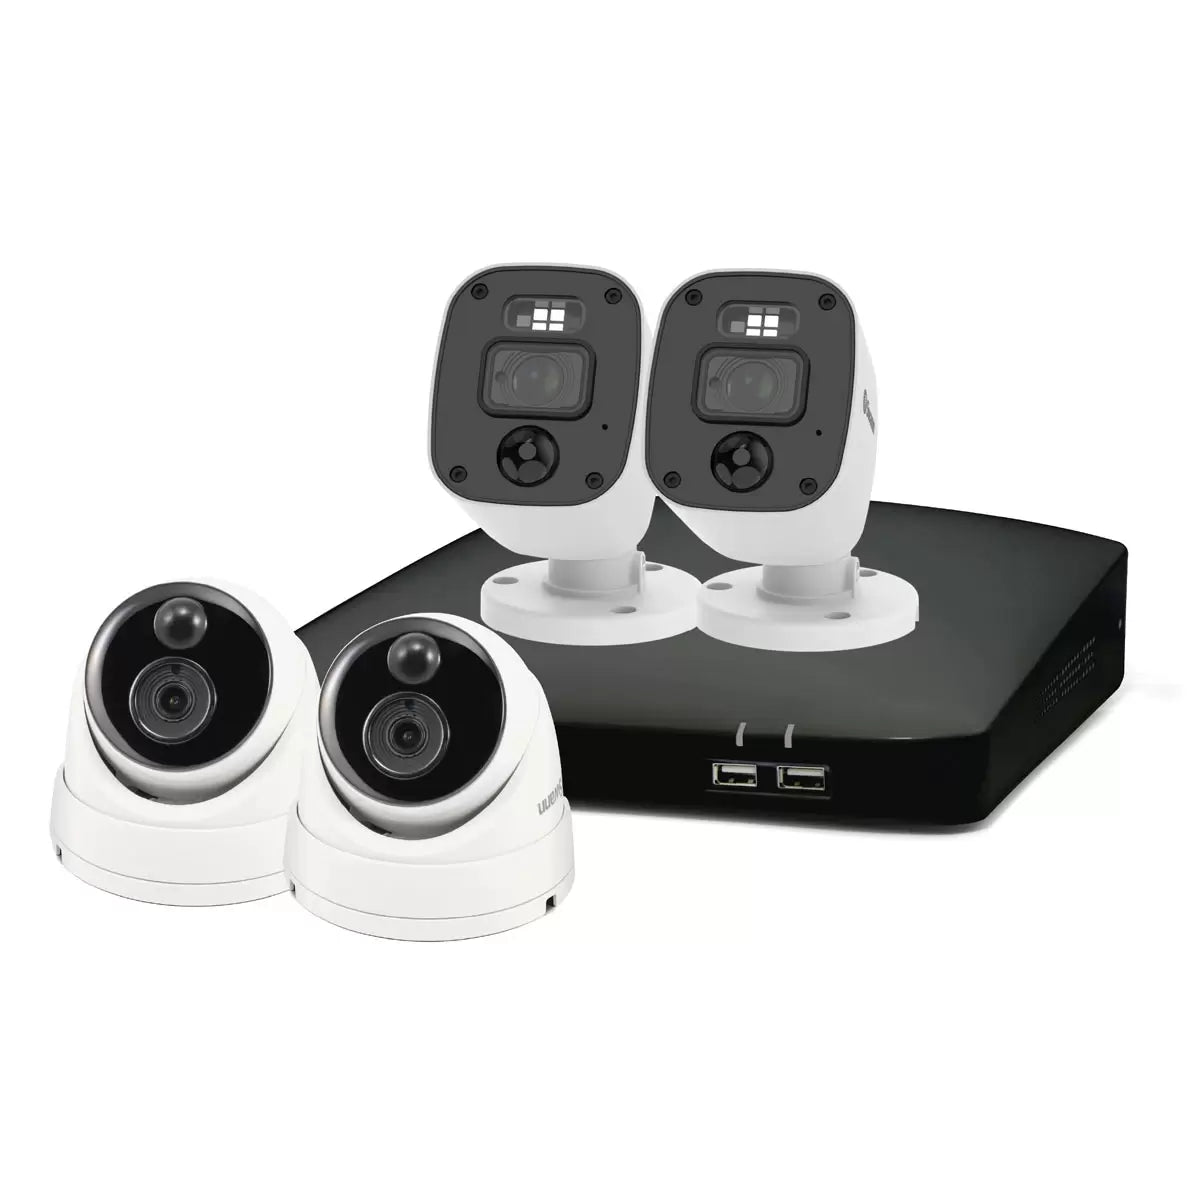 Swann 4 Channel 1080p 1TB DVR Recorder with 2 x Enforcer™ Bullet and 2 x Enforcer™ Dome Cameras, SWDVK-446802MQB2D-EU